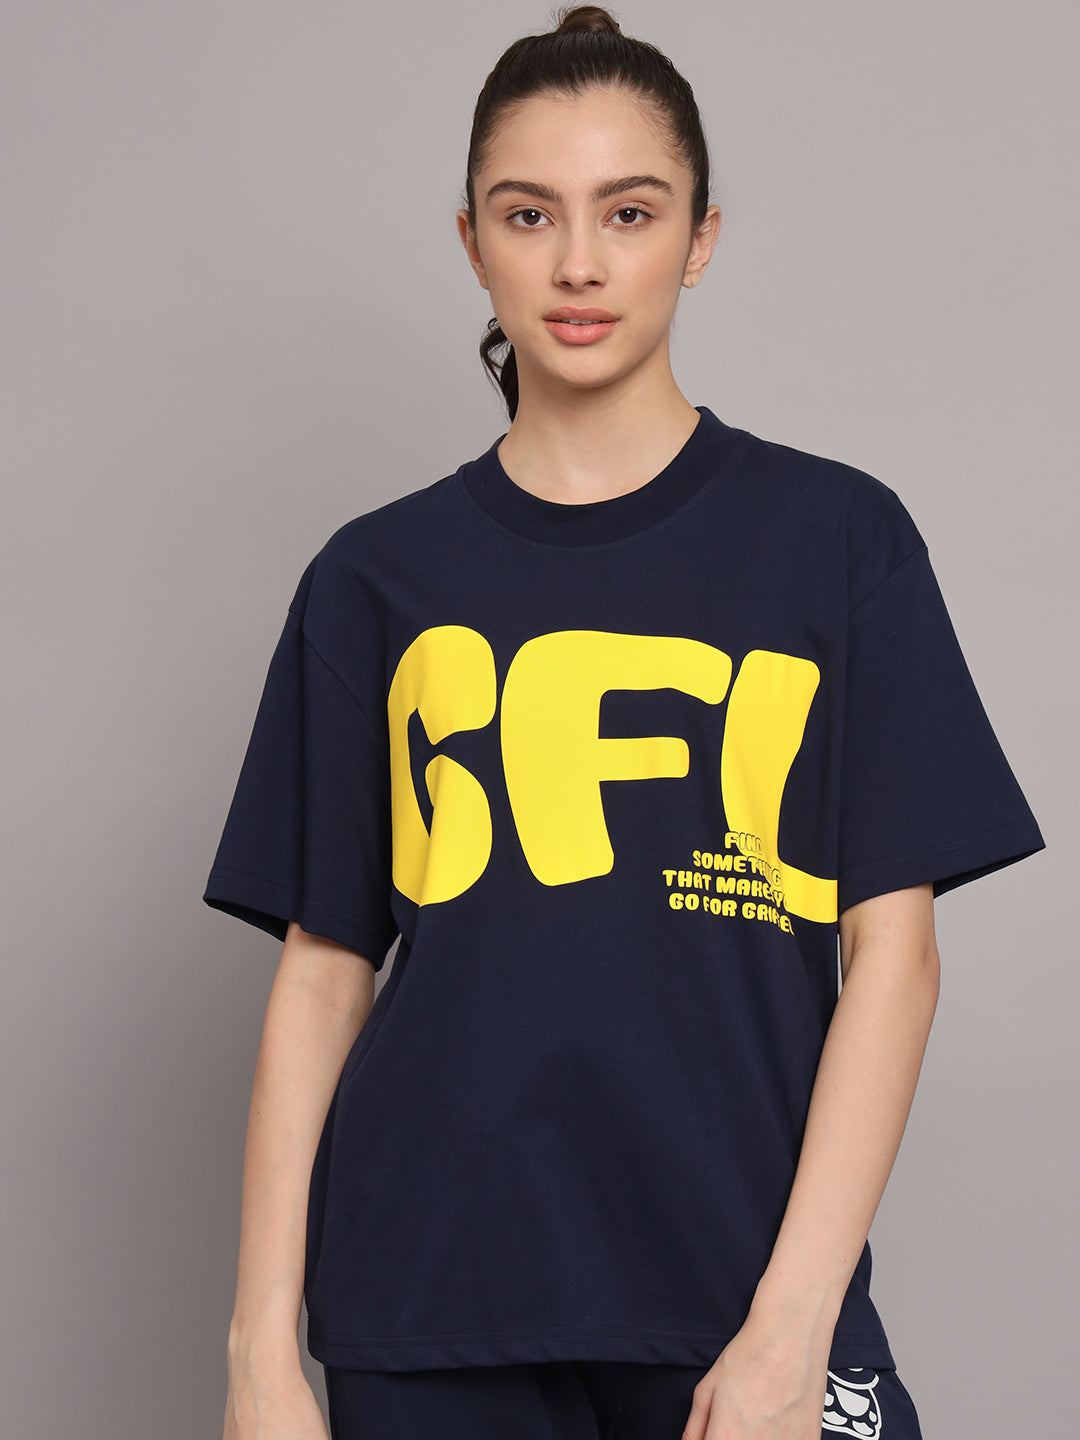 GRIFFEL Women Printed Loose fit Navy T-shirt - griffel